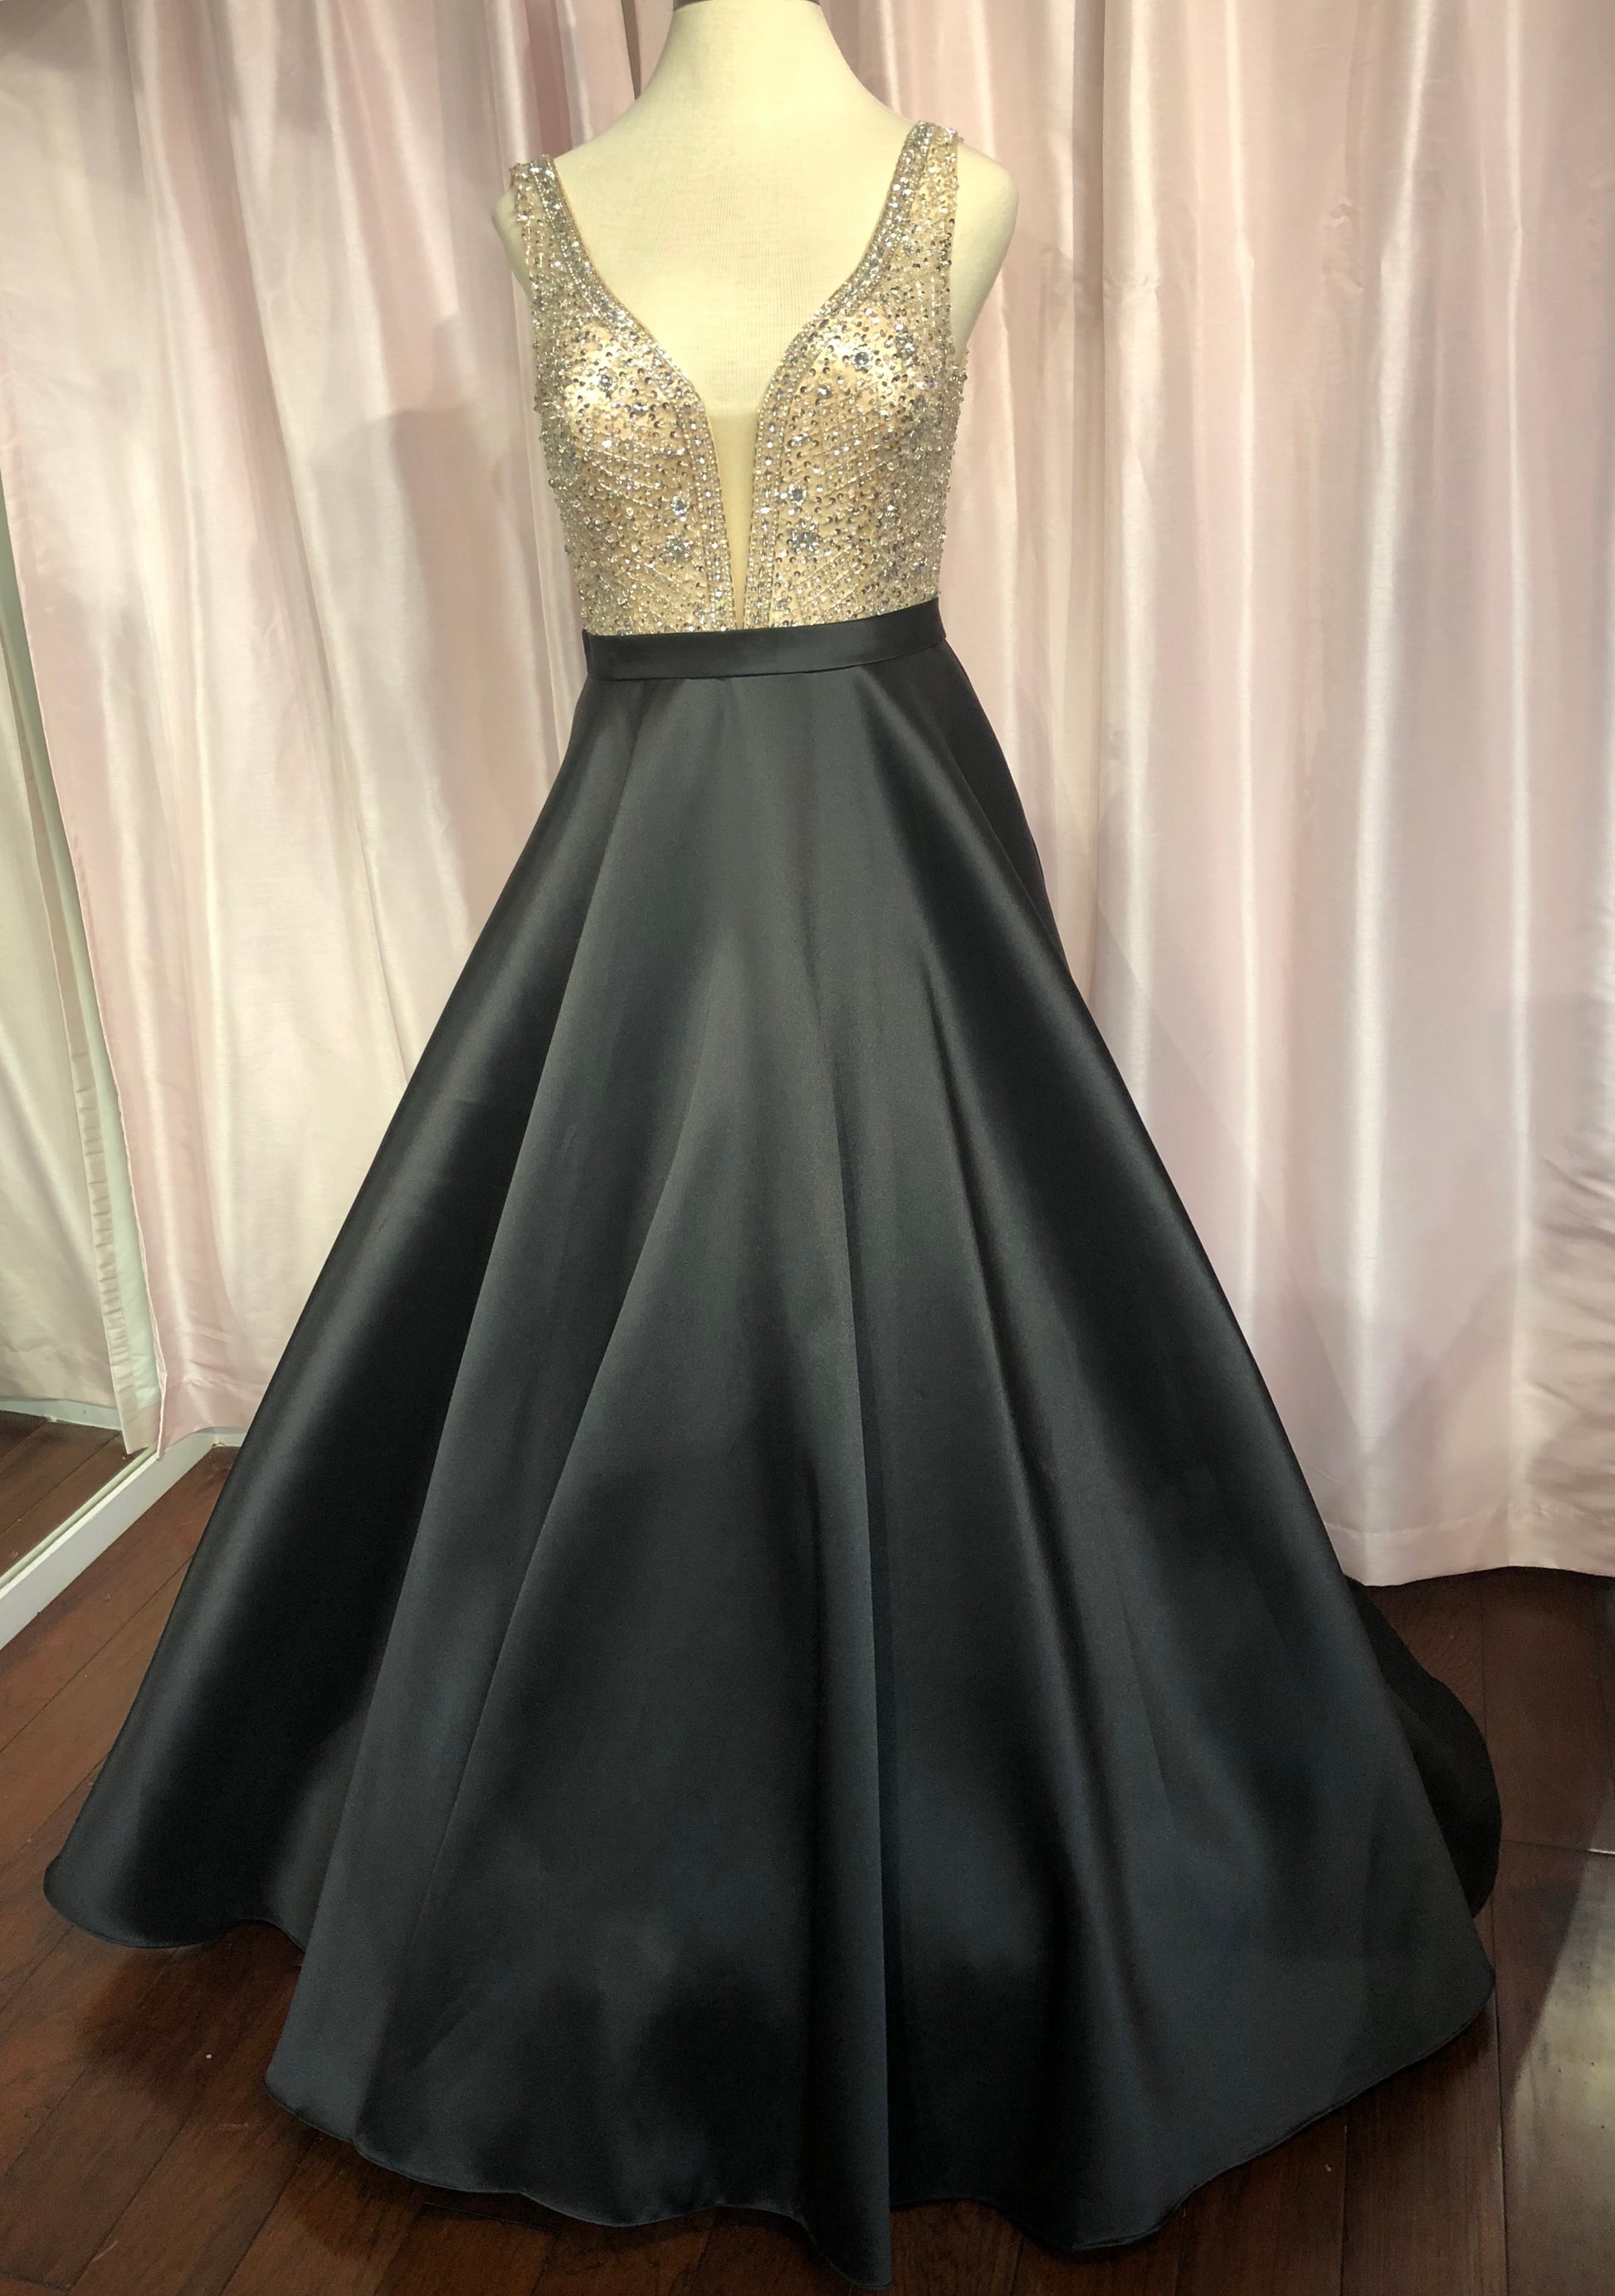 JVN60696 Black embellished plunging neckline mikado a line prom dress ball gown evening gown pageant dress 